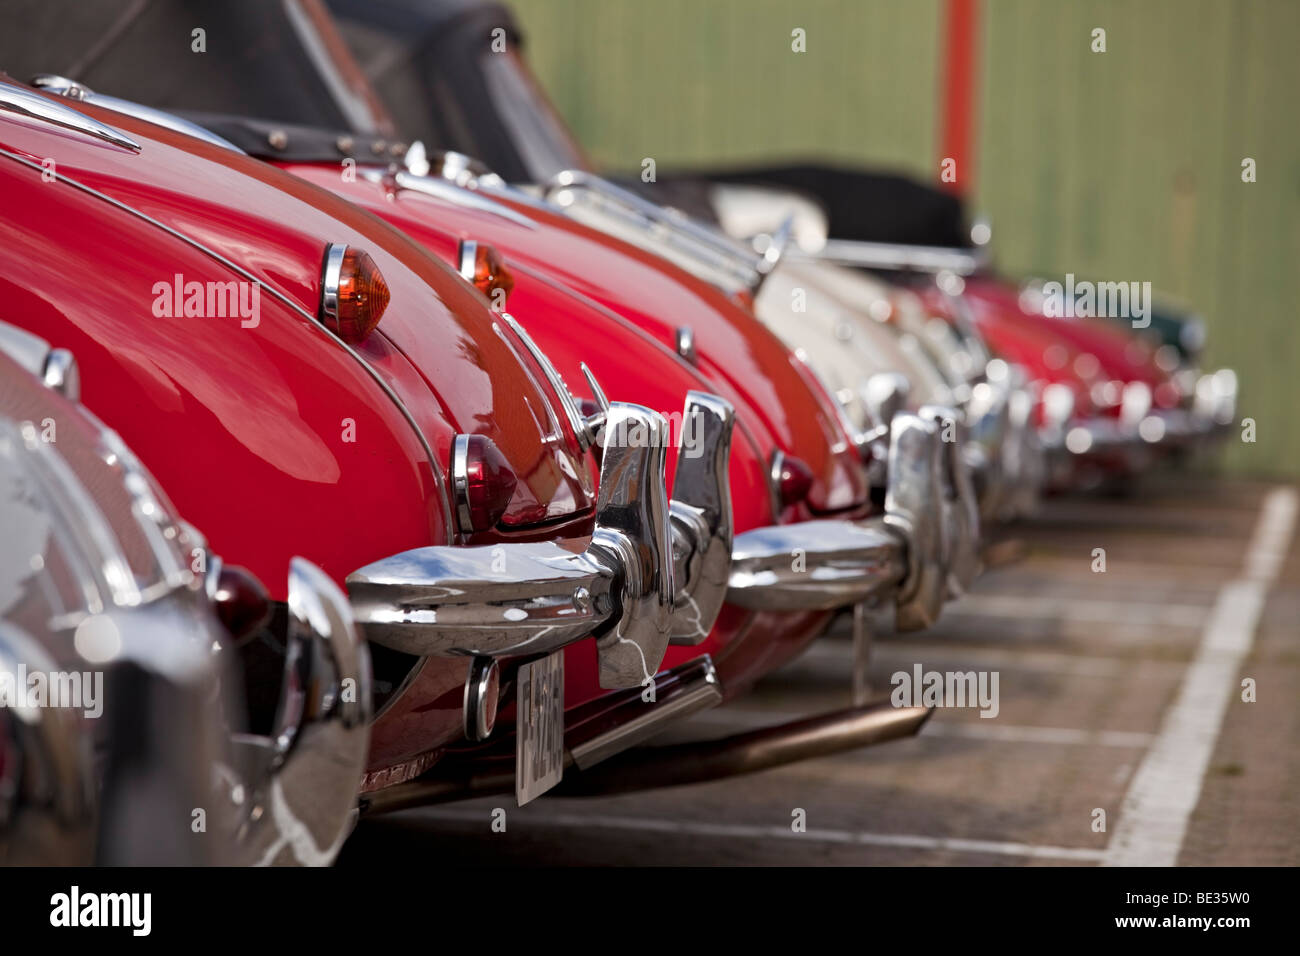 row of bumpers of classical cars Stock Photo